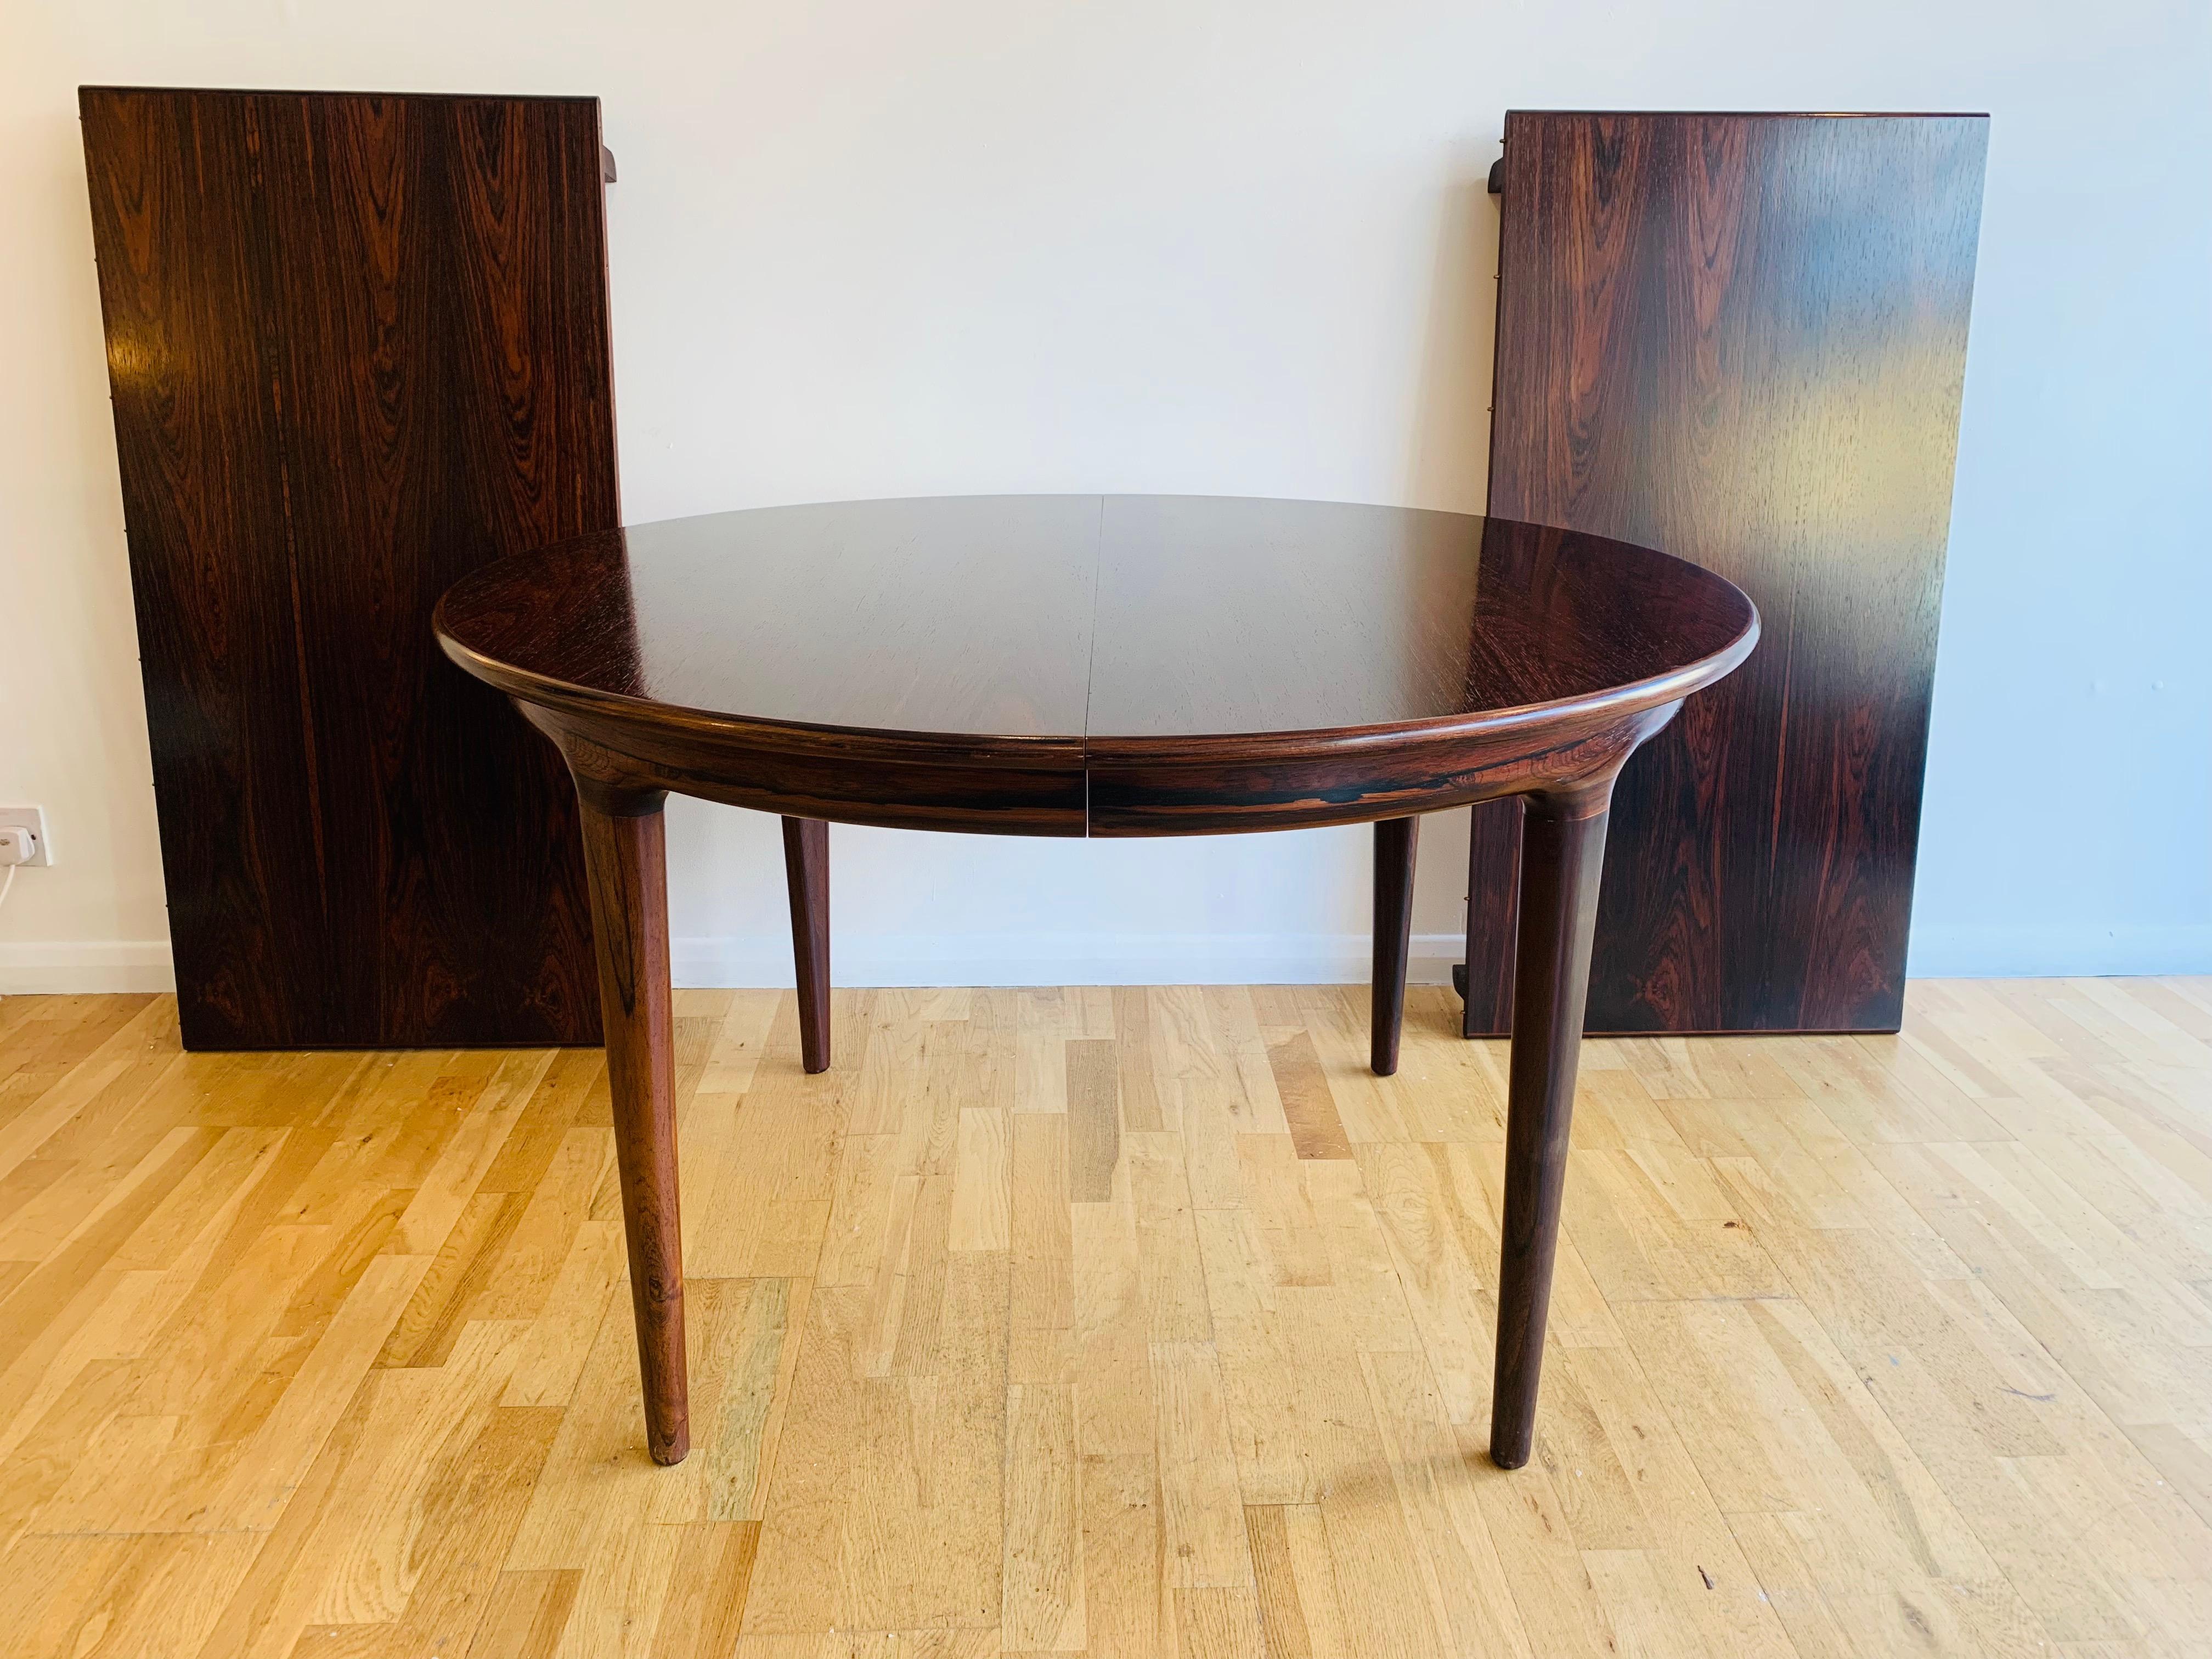 A stunning 1960s extendable rosewood dining table designed by Johannes Andersen for Uldum Møbelfabrik. The table features a veneered Rosewood top with solid tapered legs which slot into the underside of the table into the apron which seamlessly also